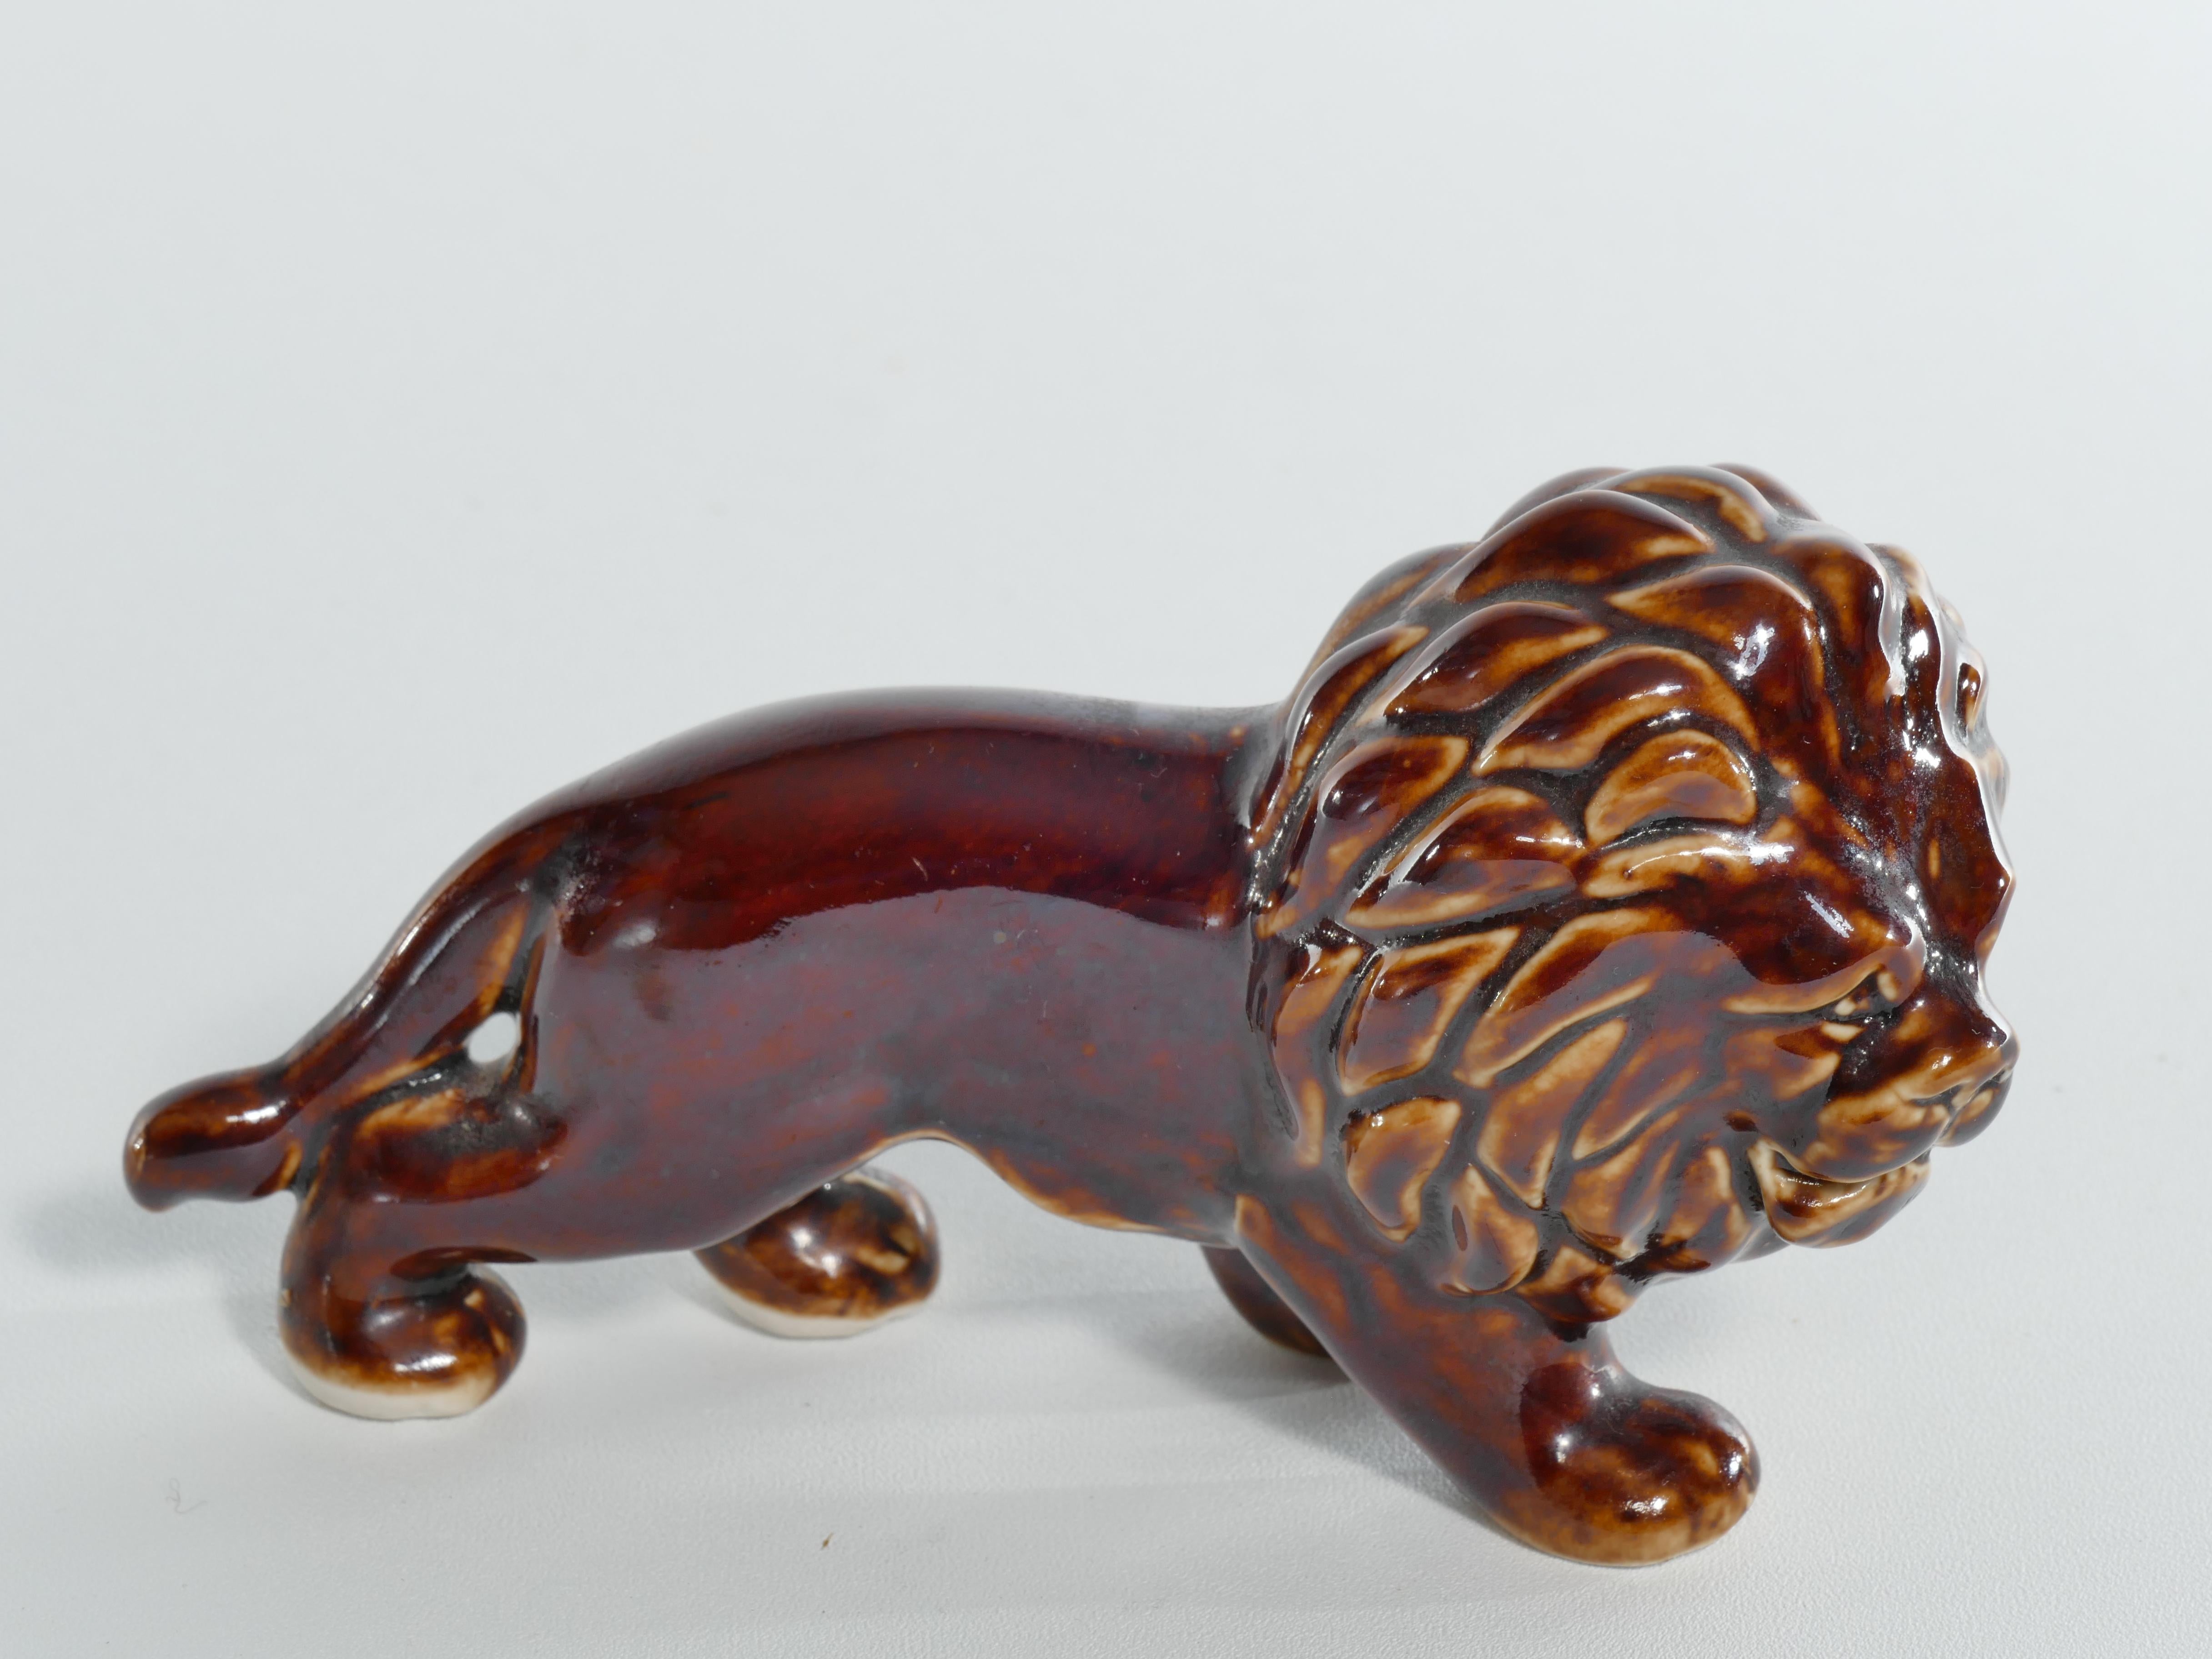 Nice anatomy in high gloss brown glaze. Detailed lion mane, face with good proportions. The lustrous brown glaze adorning the surface adds depth and character, reflecting the play of light.

The lion, a symbol of strength, protection, and power in